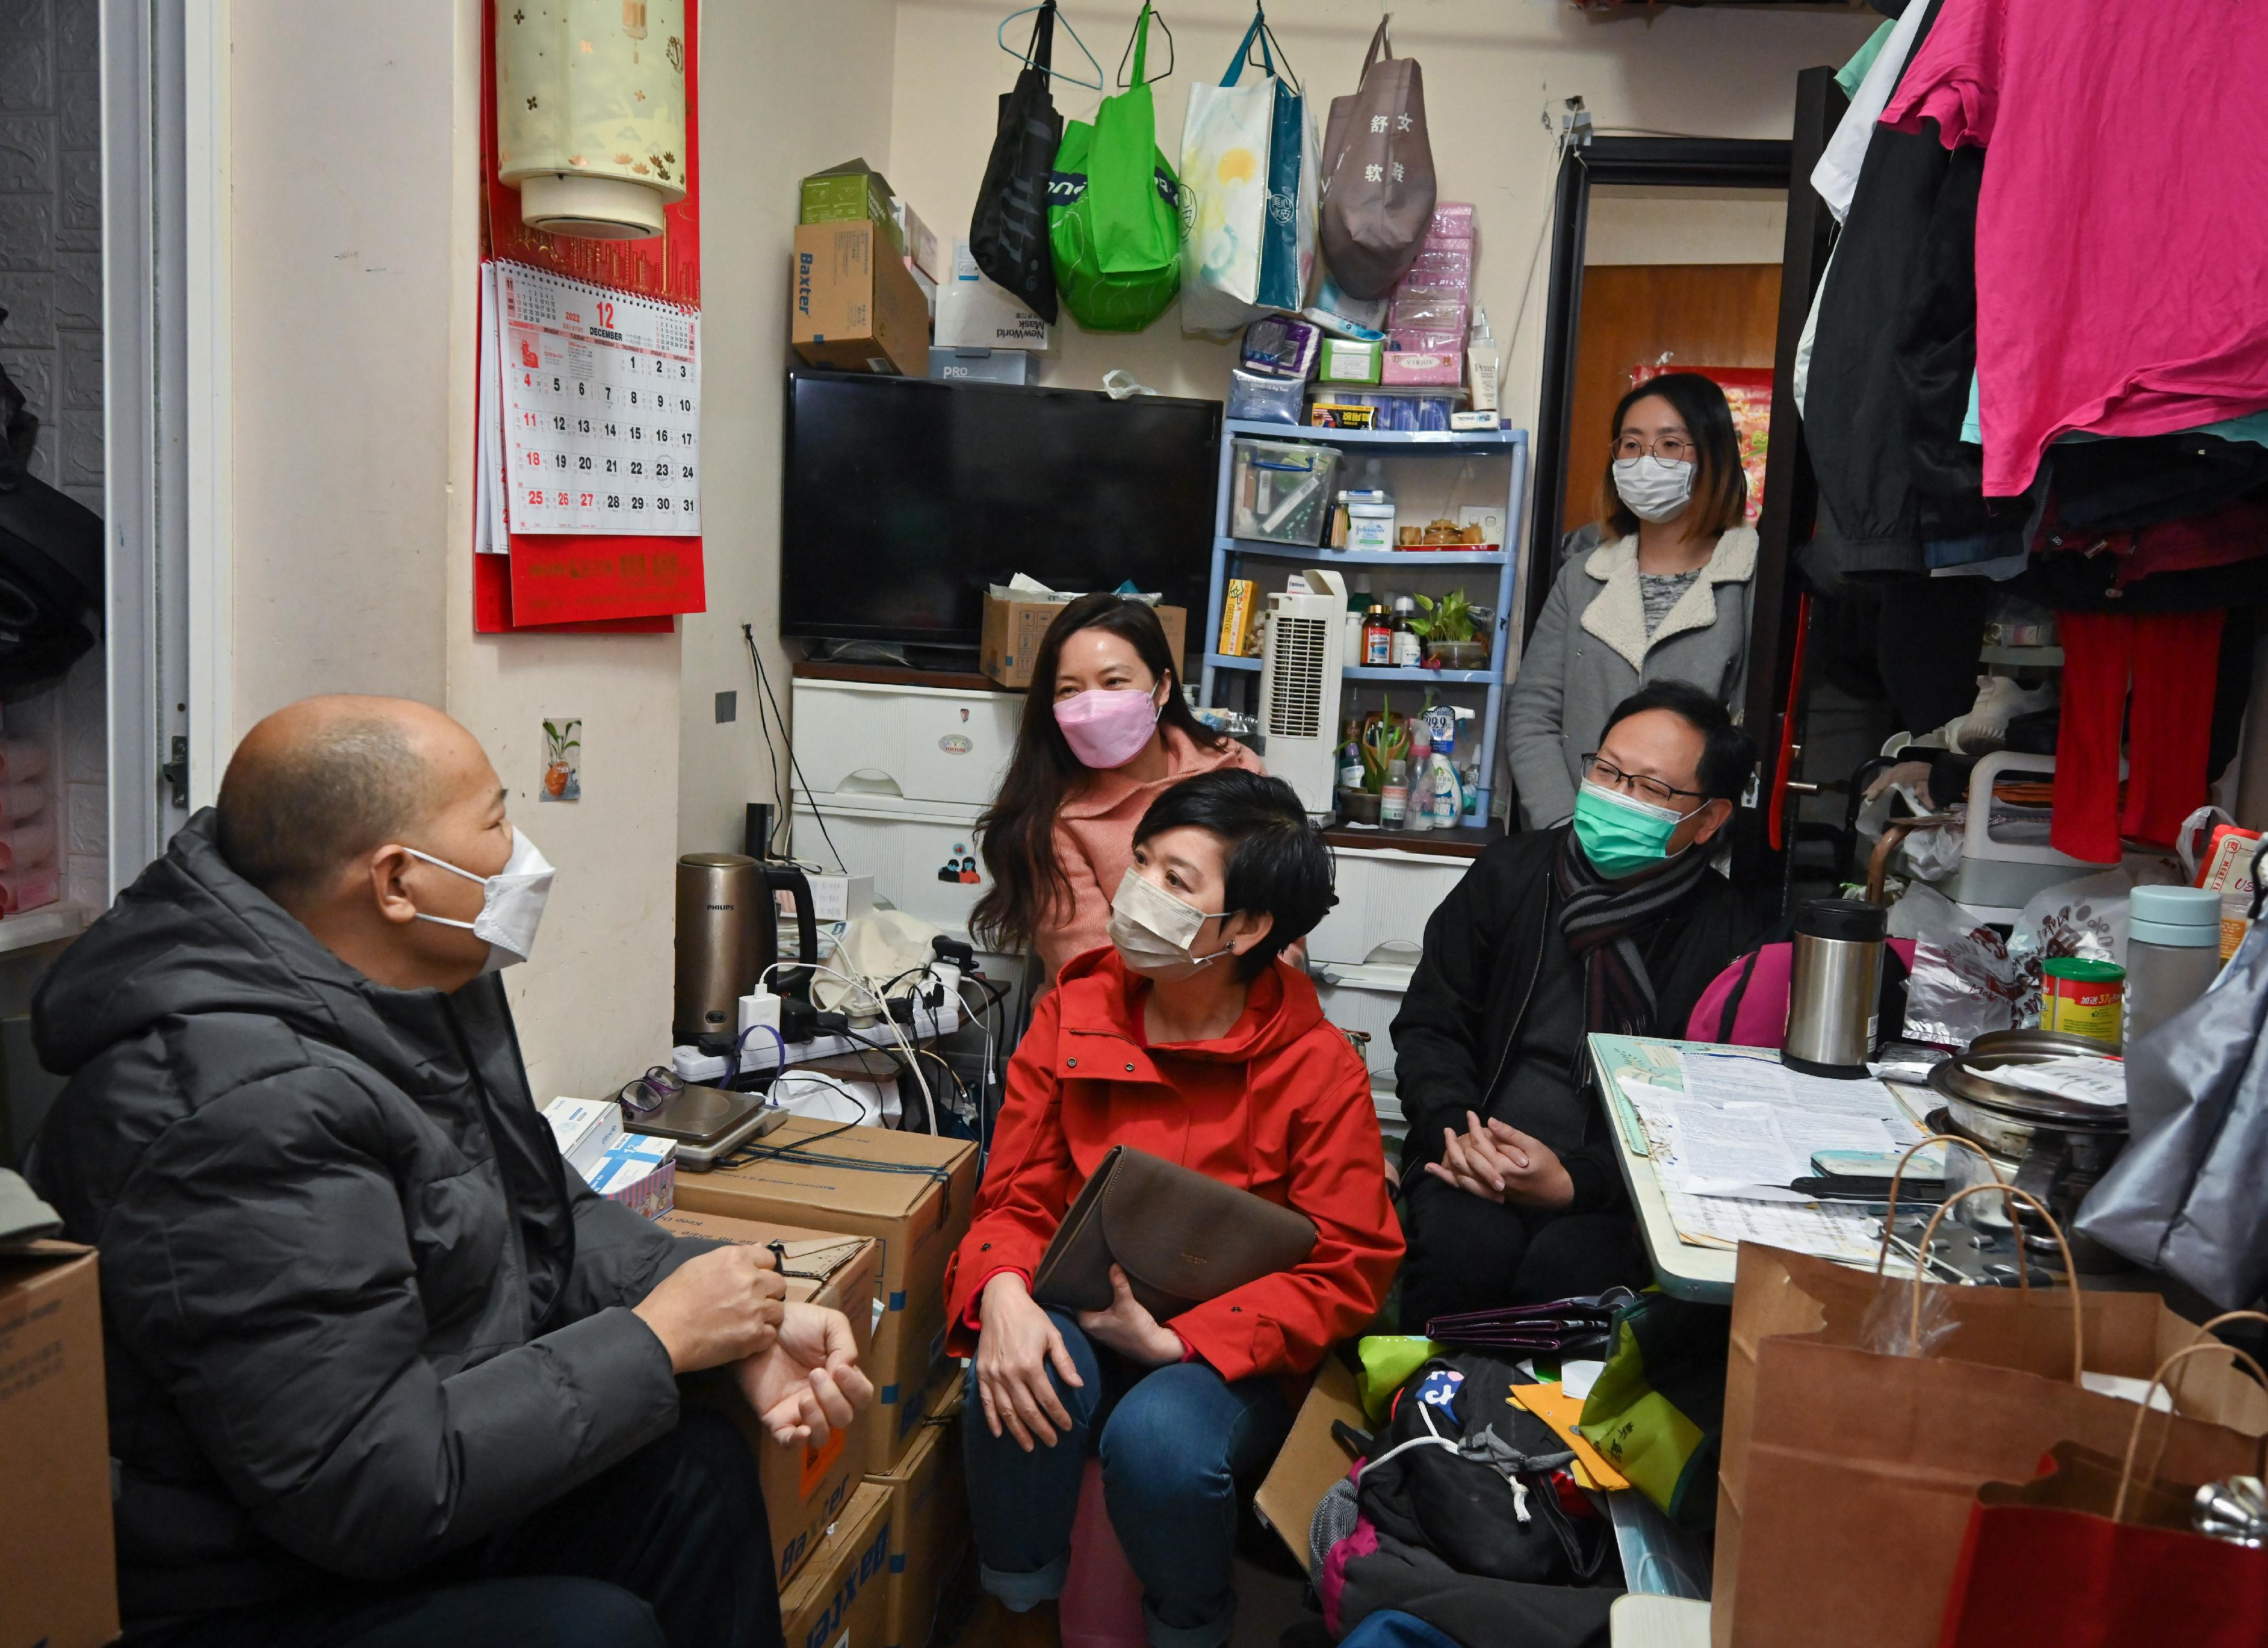 The Secretary for Housing, Ms Winnie Ho (front row centre), Project Director Mr Edward Wong (front row right) and Project Manager Ms Cherry Fung (back row right) of the Architectural Services Department, accompanied by the Deputy Director of the Society for Community Organization, Ms Sze Lai-shan (back row left), visited tenants of subdivided units in Sham Shui Po and Prince Edward today (December 22). 